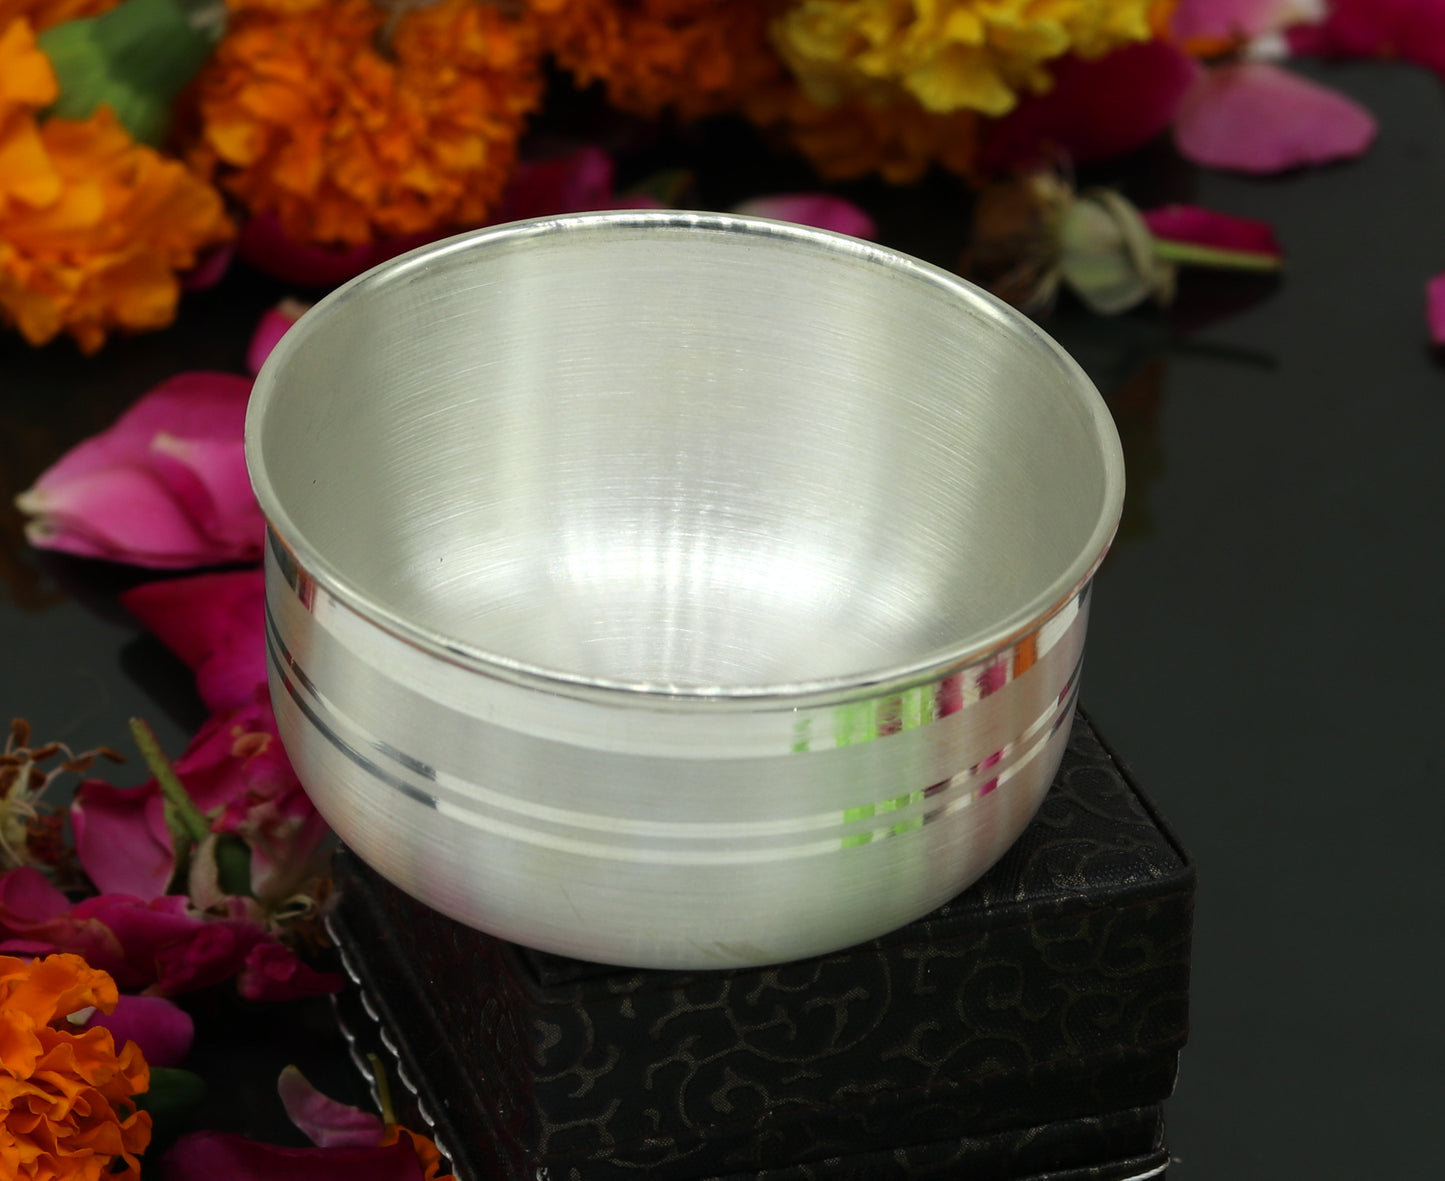 999 pure sterling silver handmade solid silver bowl kitchen utensils, vessels, silver has antibacterial properties, keep stay healthy sv56 - TRIBAL ORNAMENTS